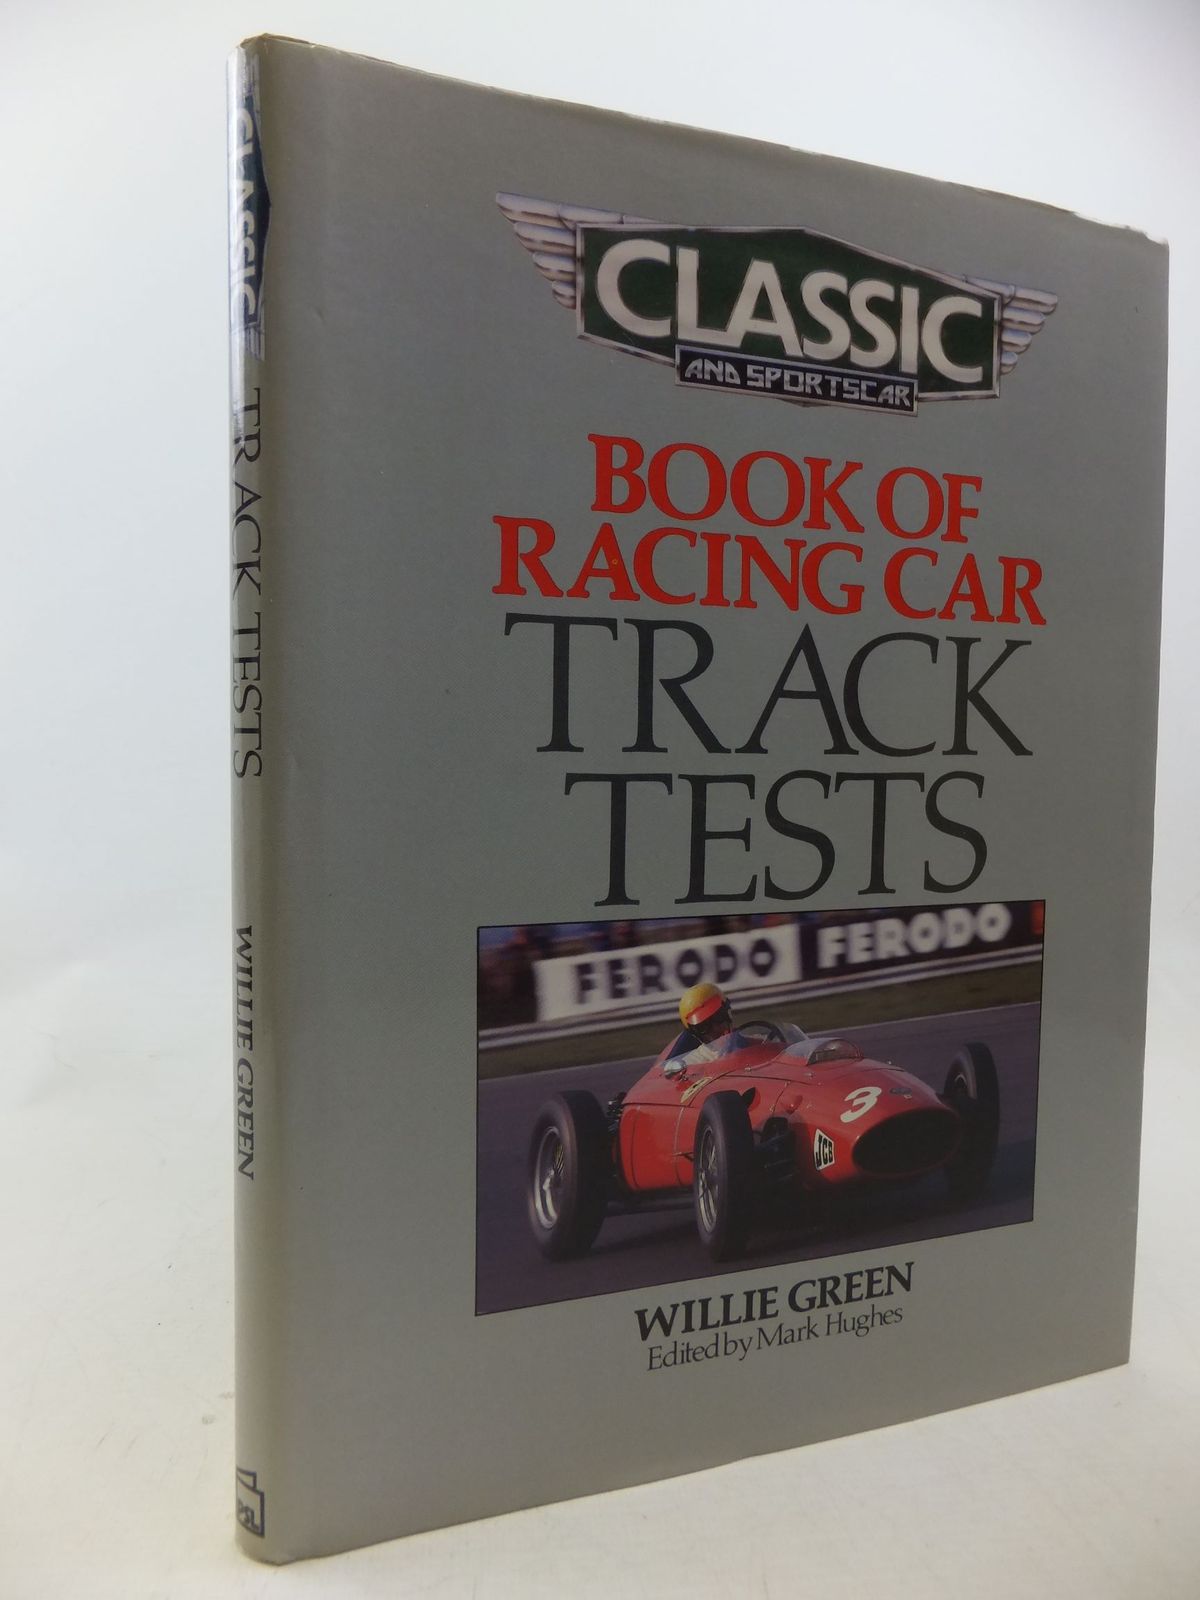 Photo of CLASSIC AND SPORTSCAR BOOK OF RACING CAR TRACK TESTS- Stock Number: 1710648